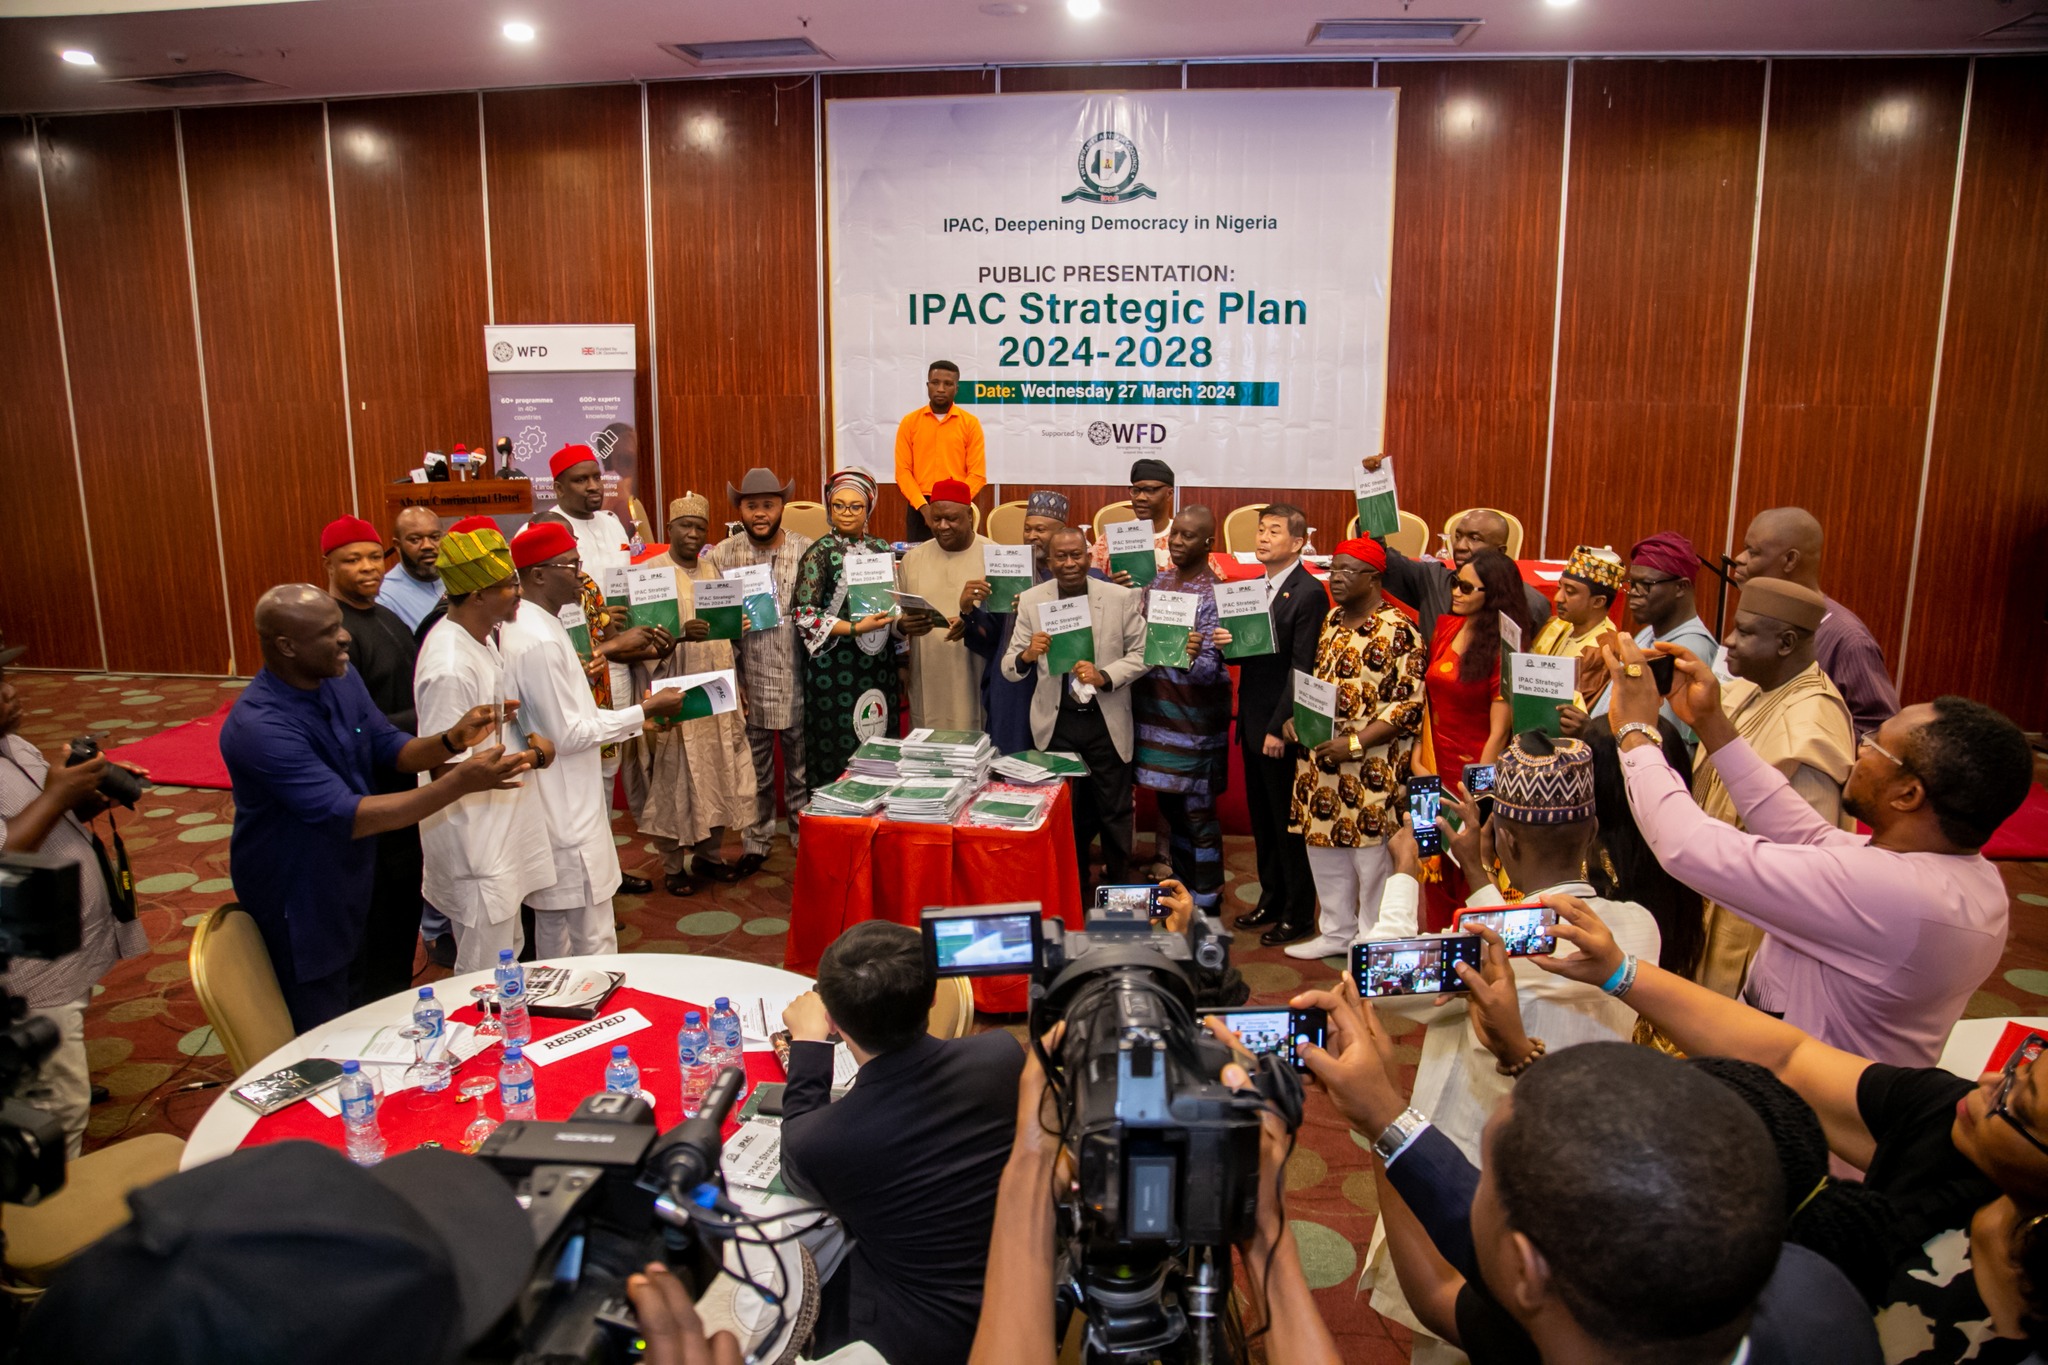 Inter-Party Advisory Council Nigeria - IPAC to unveil its first ever Strategic Plan